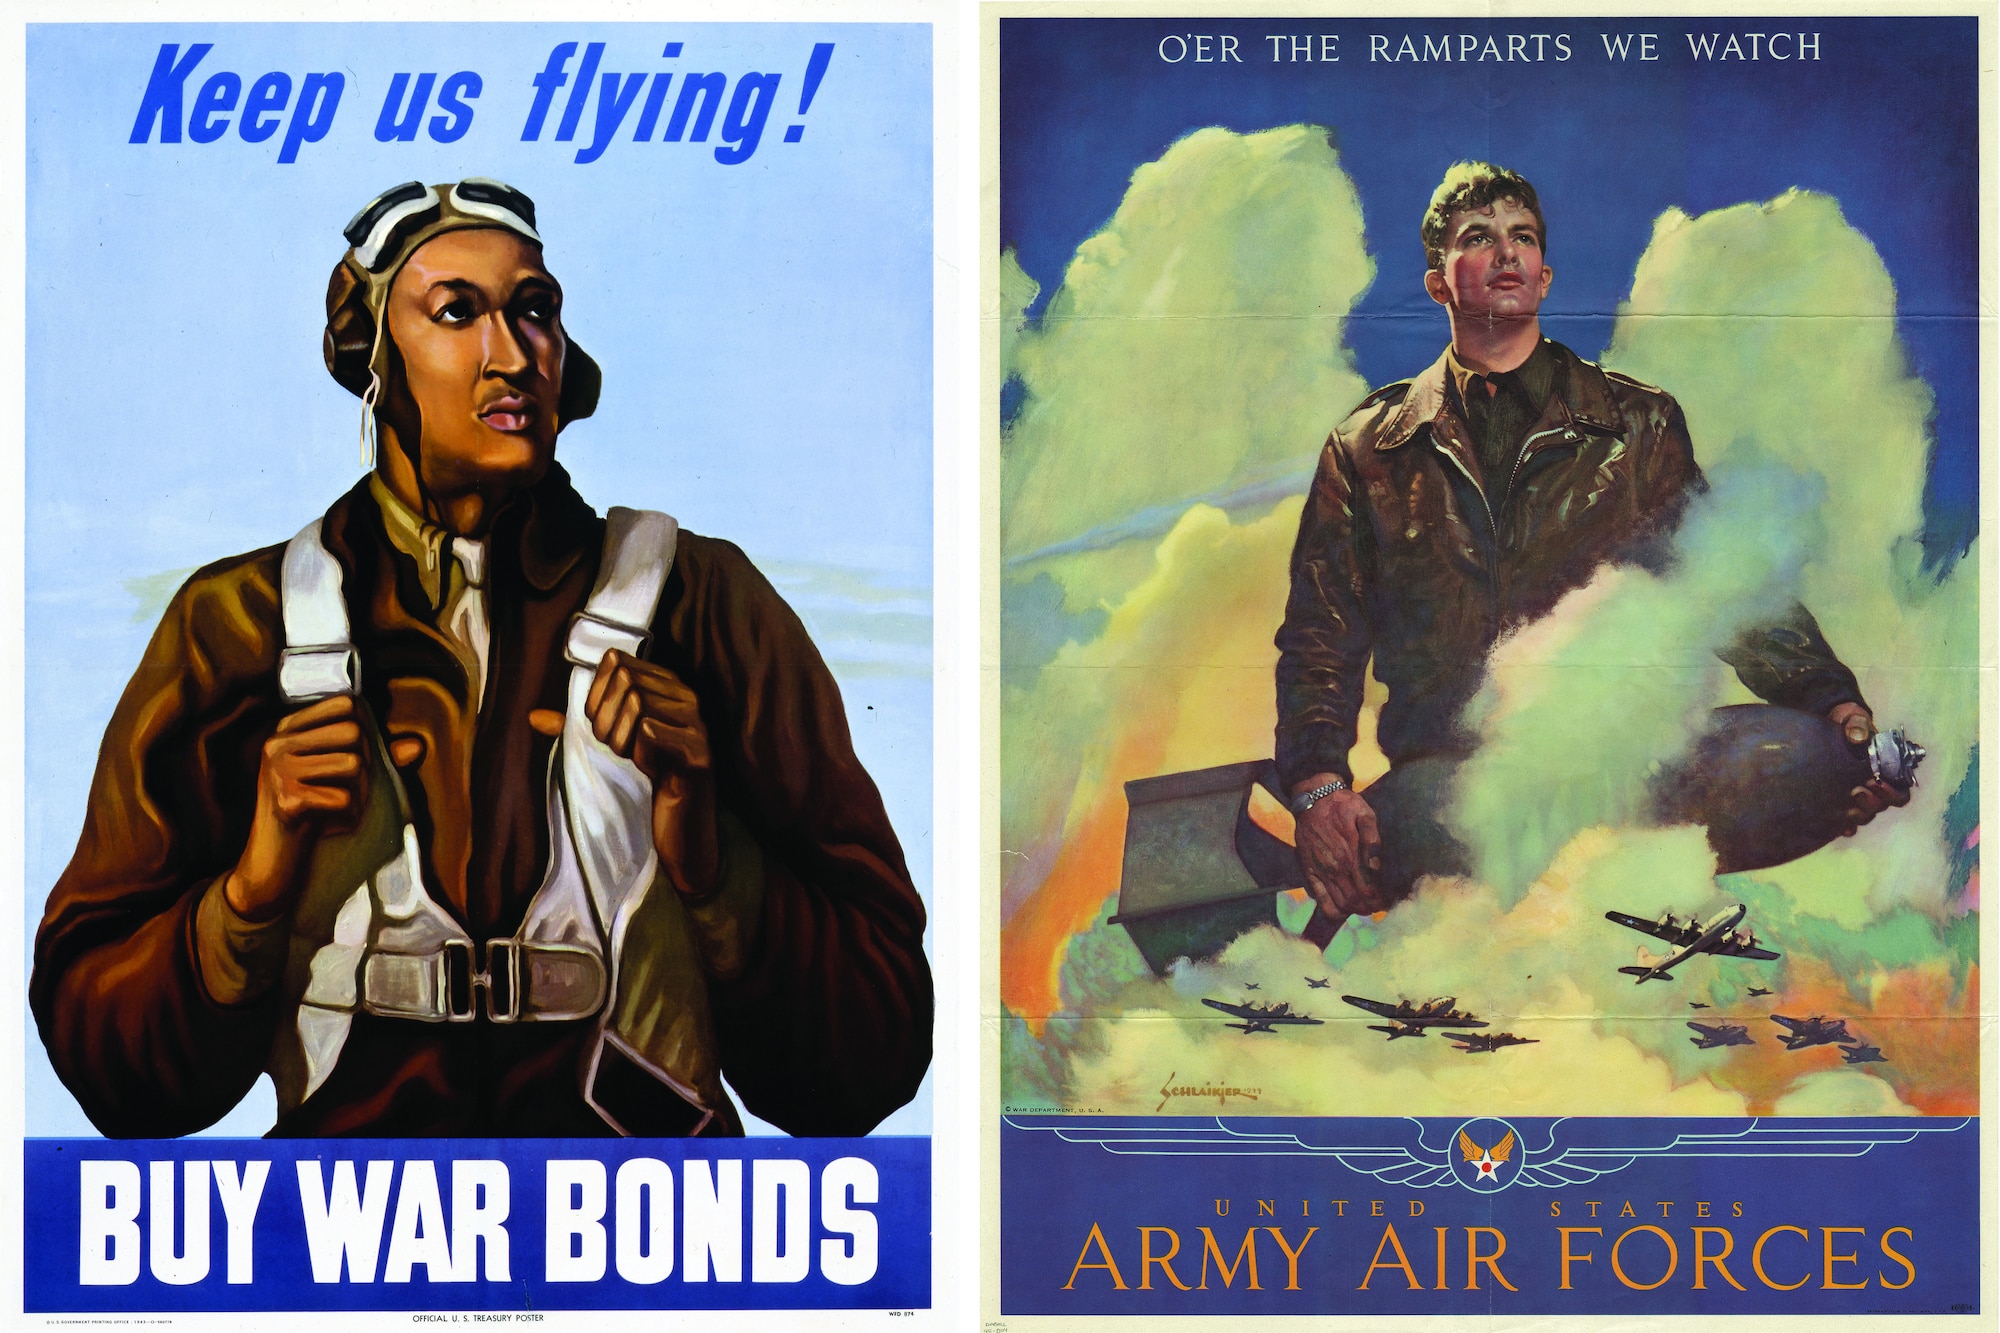 Image of poster that states "Kee us flying! Buy War Bonds". And a poster that states "O'er the Ramparts we watch, United States Army air Forces".